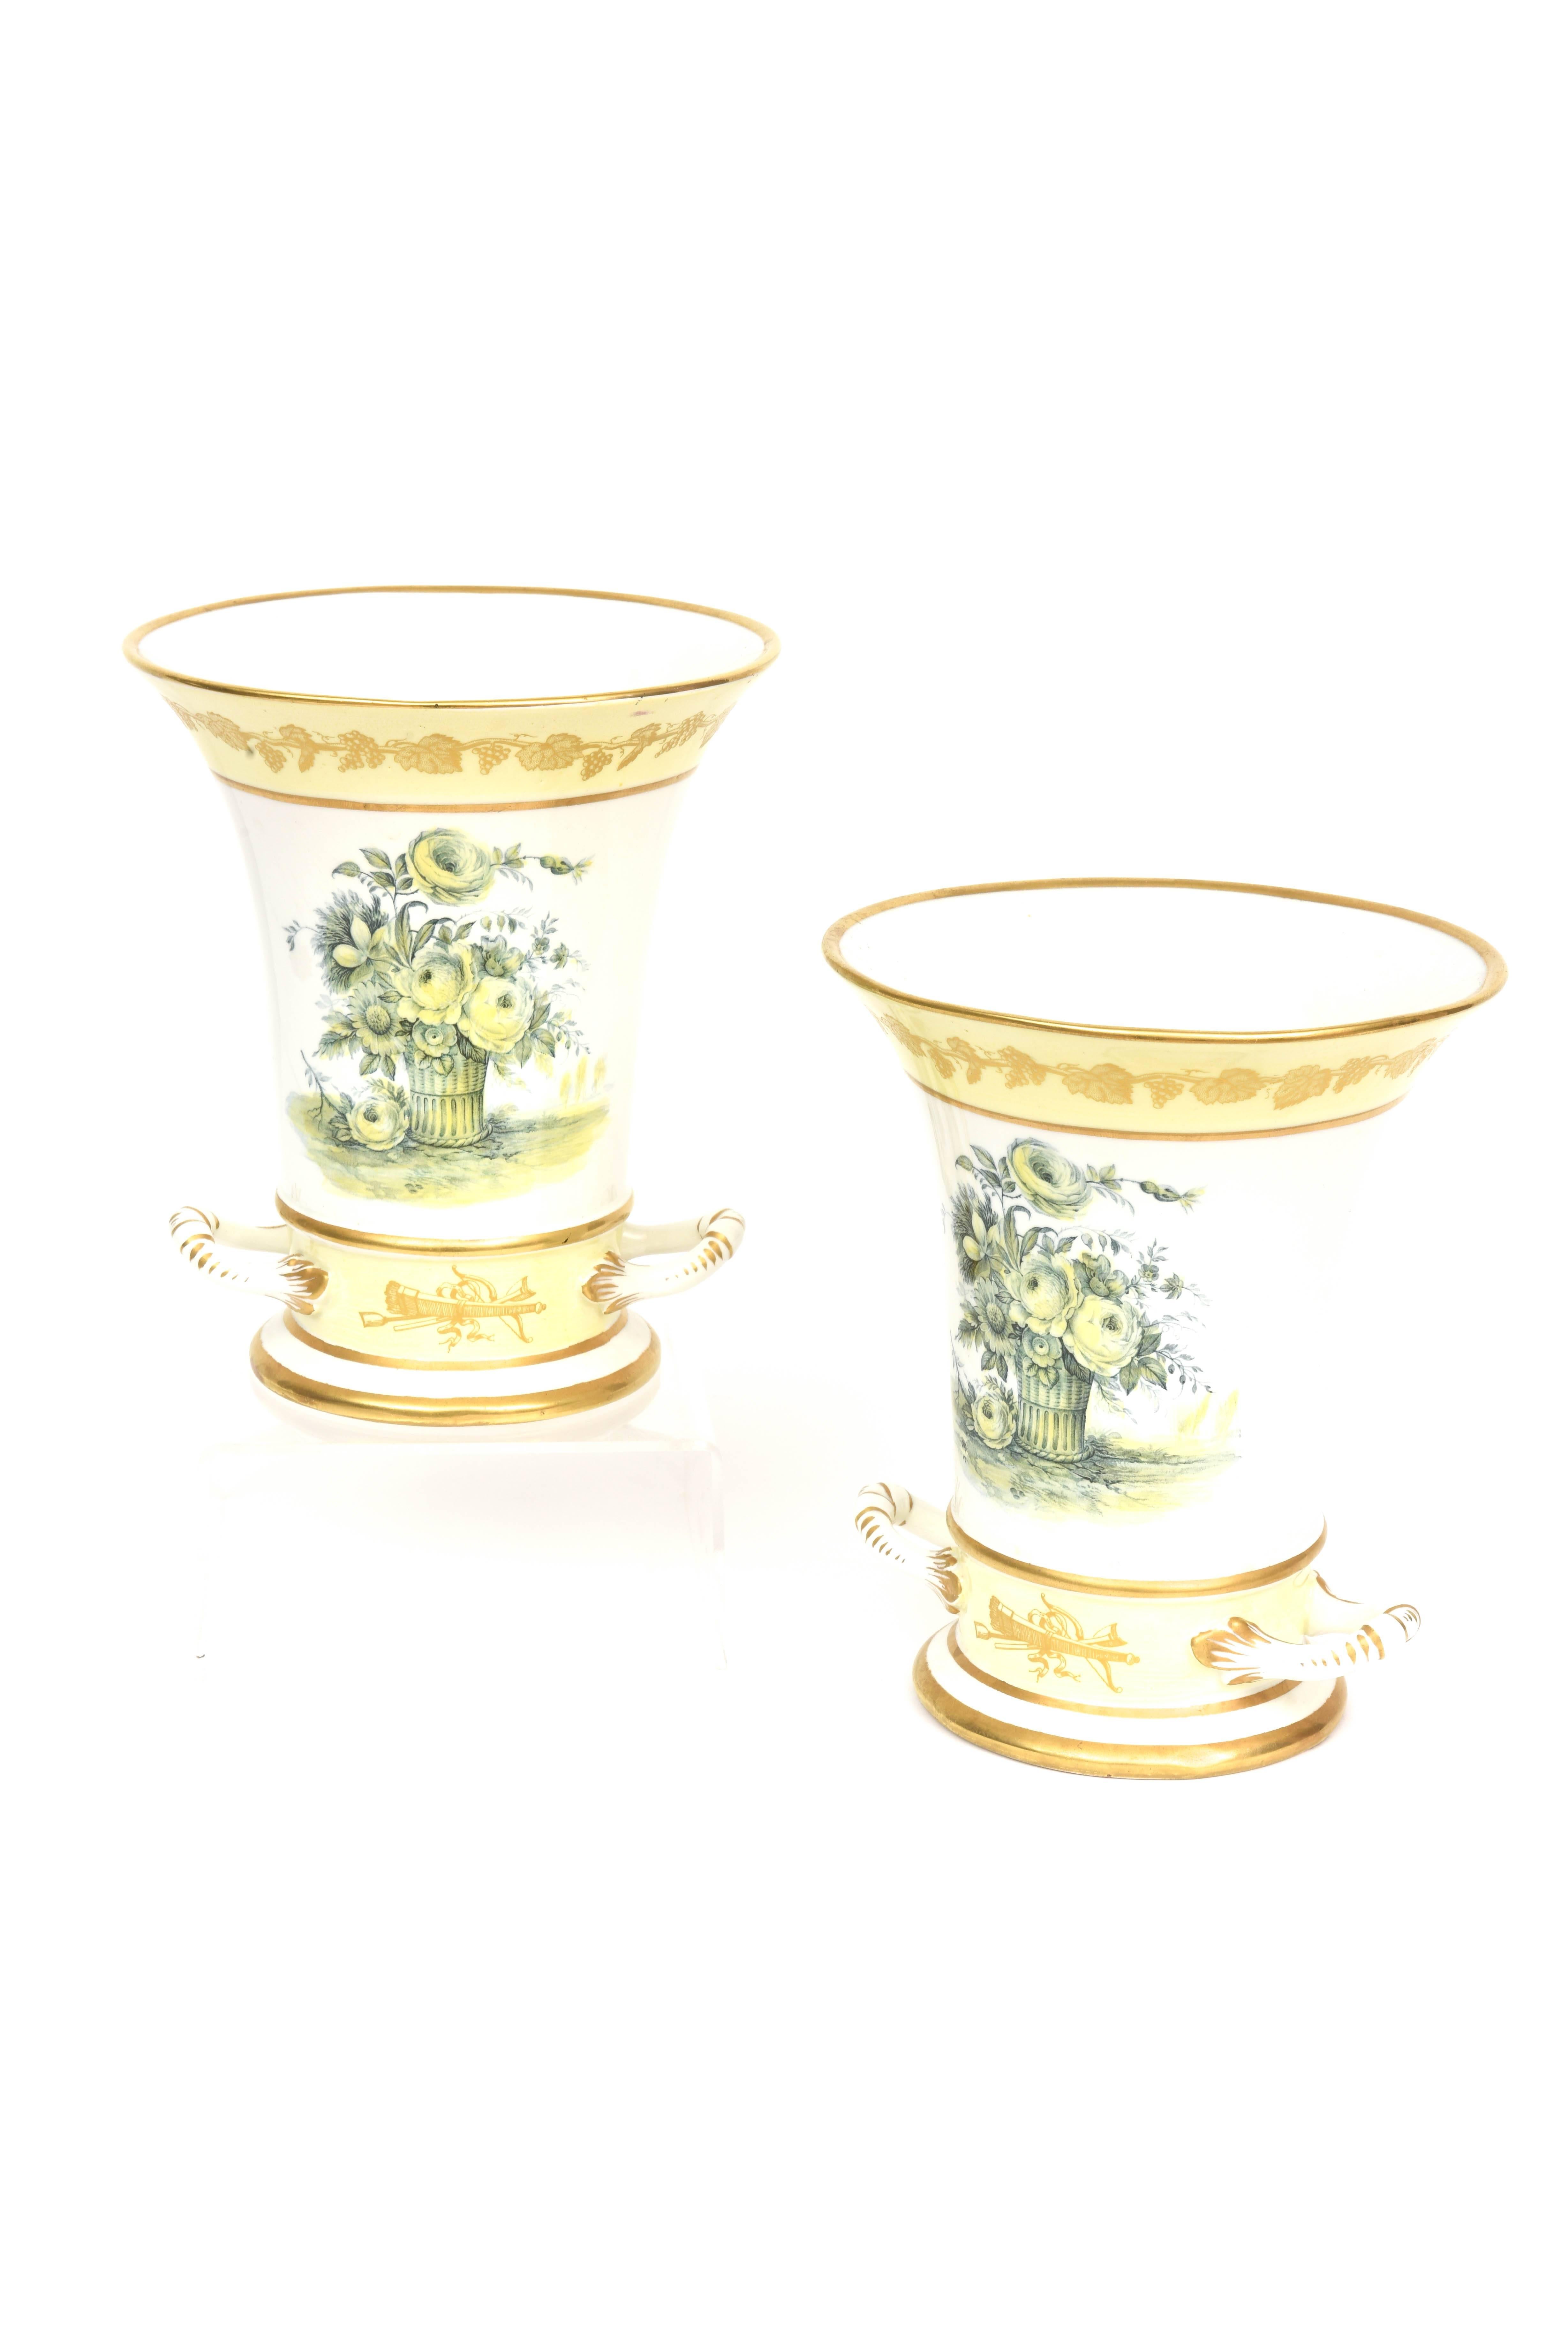 Pair of Vases, Mottahedeh, Pretty Yellow Floral Design, Vintage 3